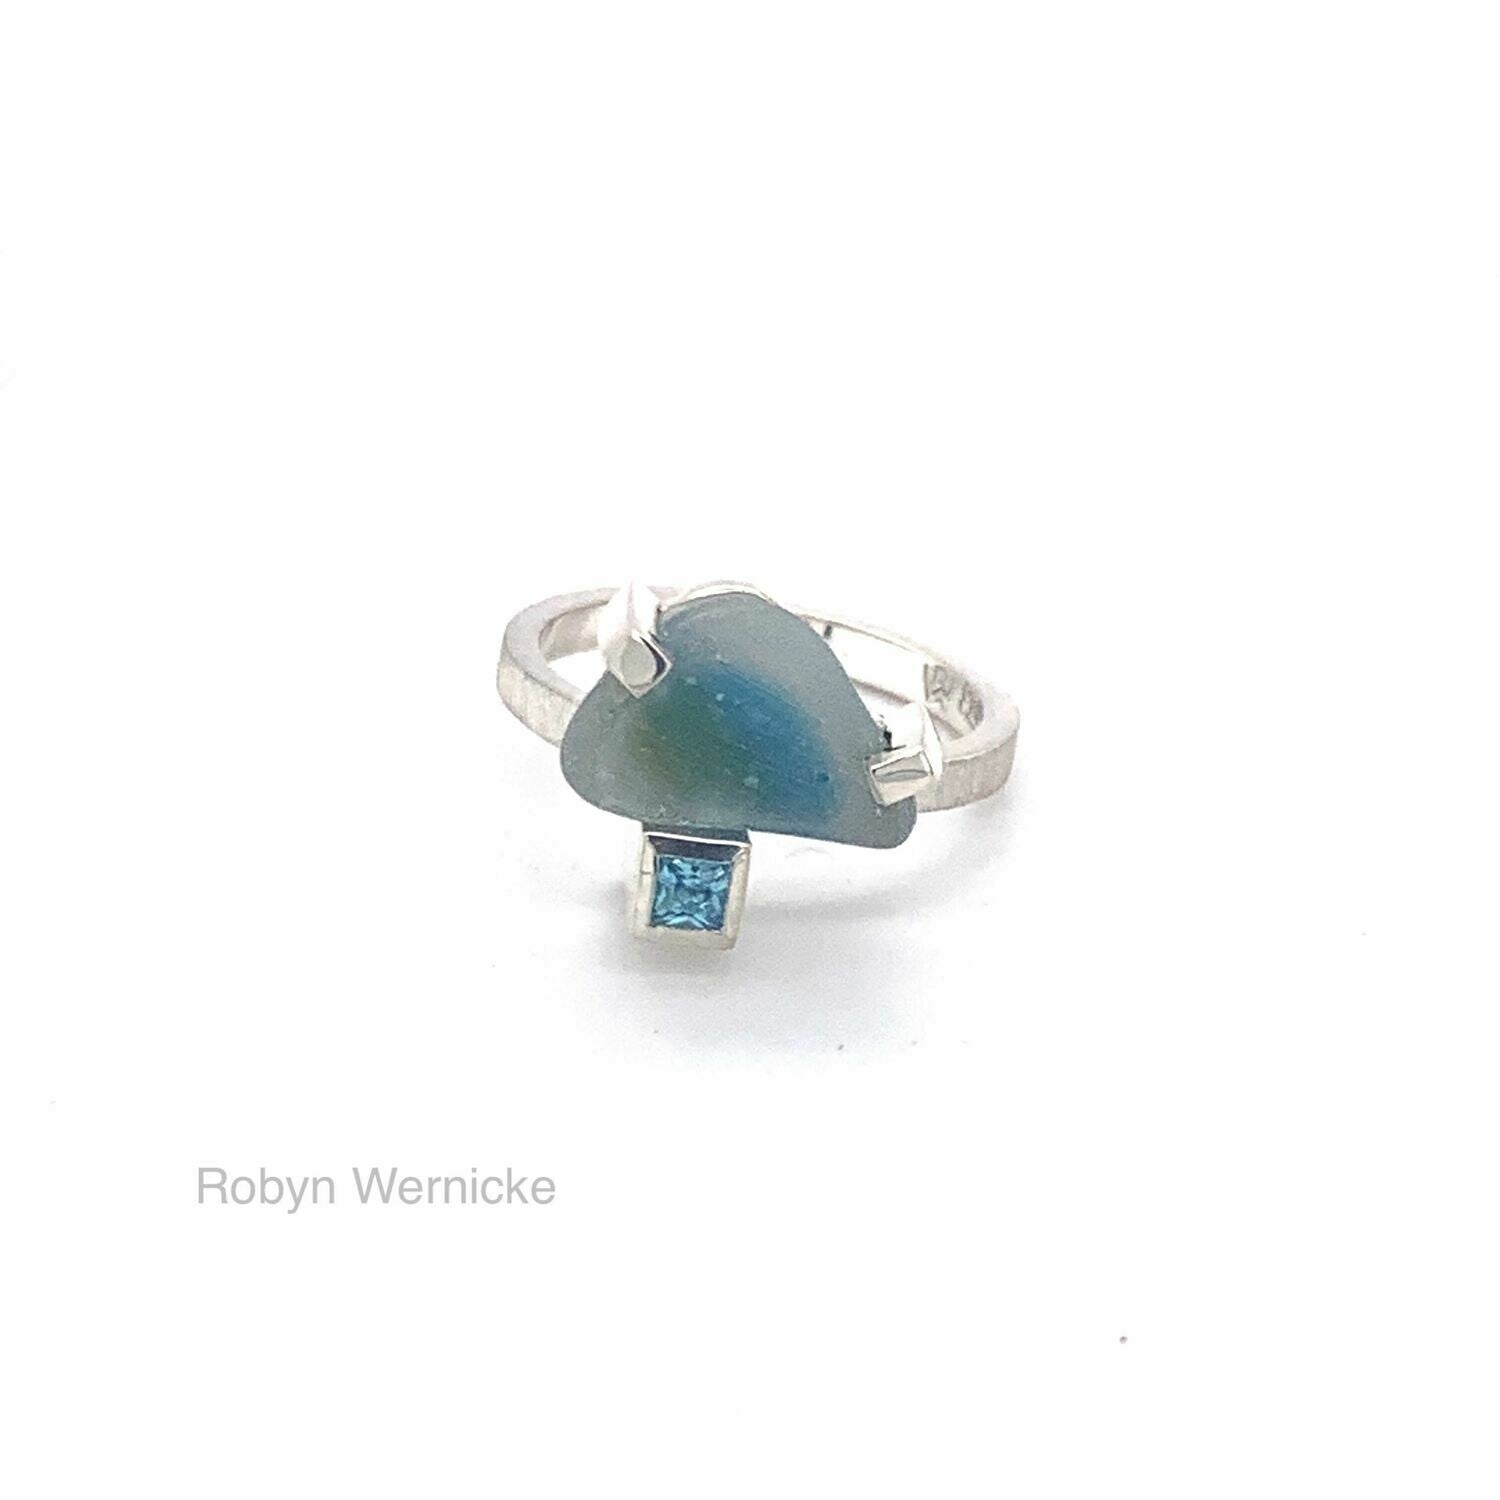 Beach Glass and Topaz Ring.